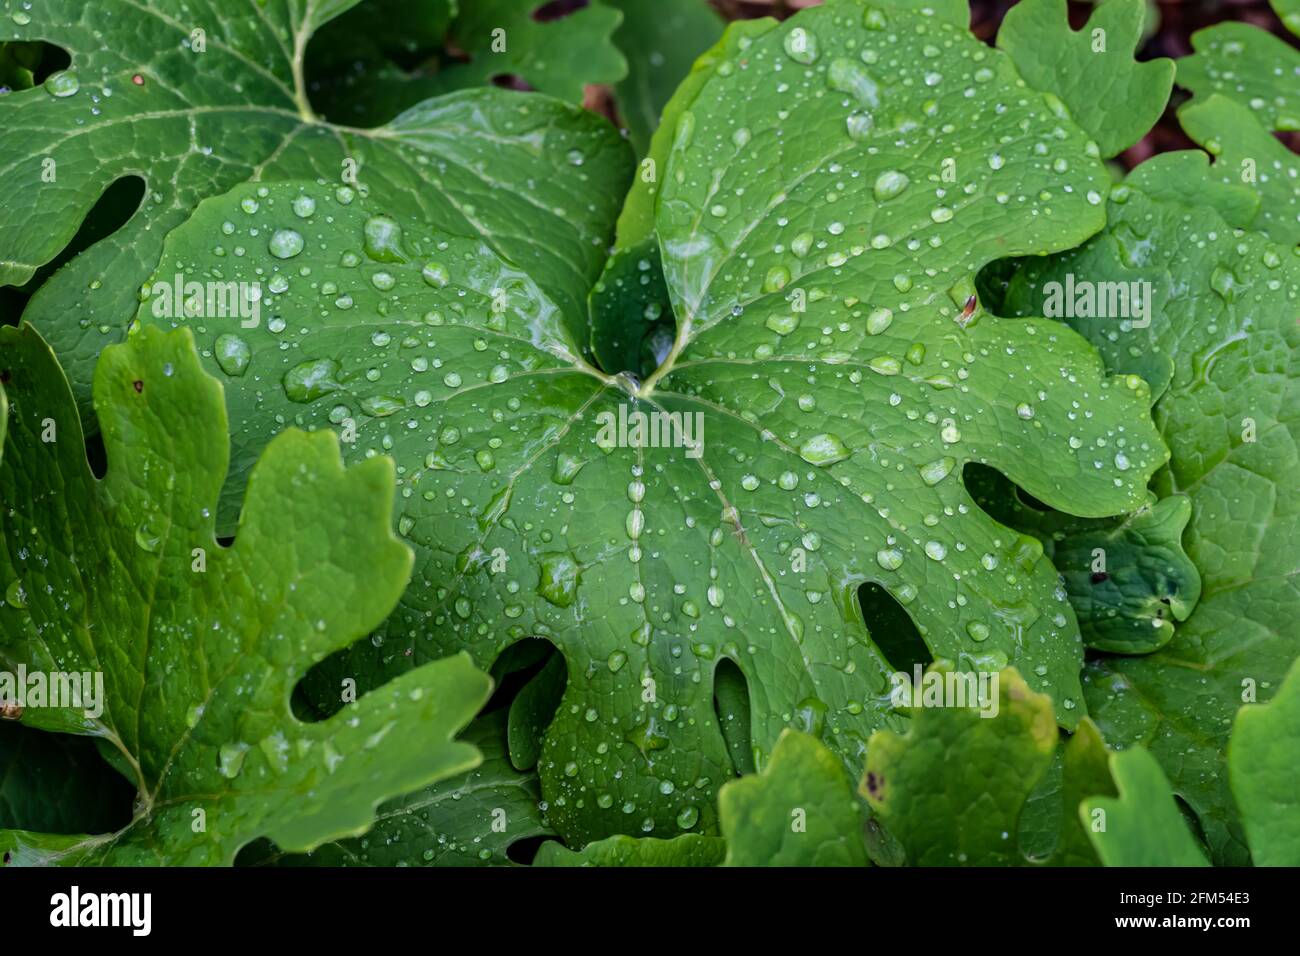 Closeup of leaves of Bloodroot plant - Sanguinaria canadensis - after the rain. Wet with water droplets In Springwater Forest, Aylmer, Ontario, Canada. Stock Photo